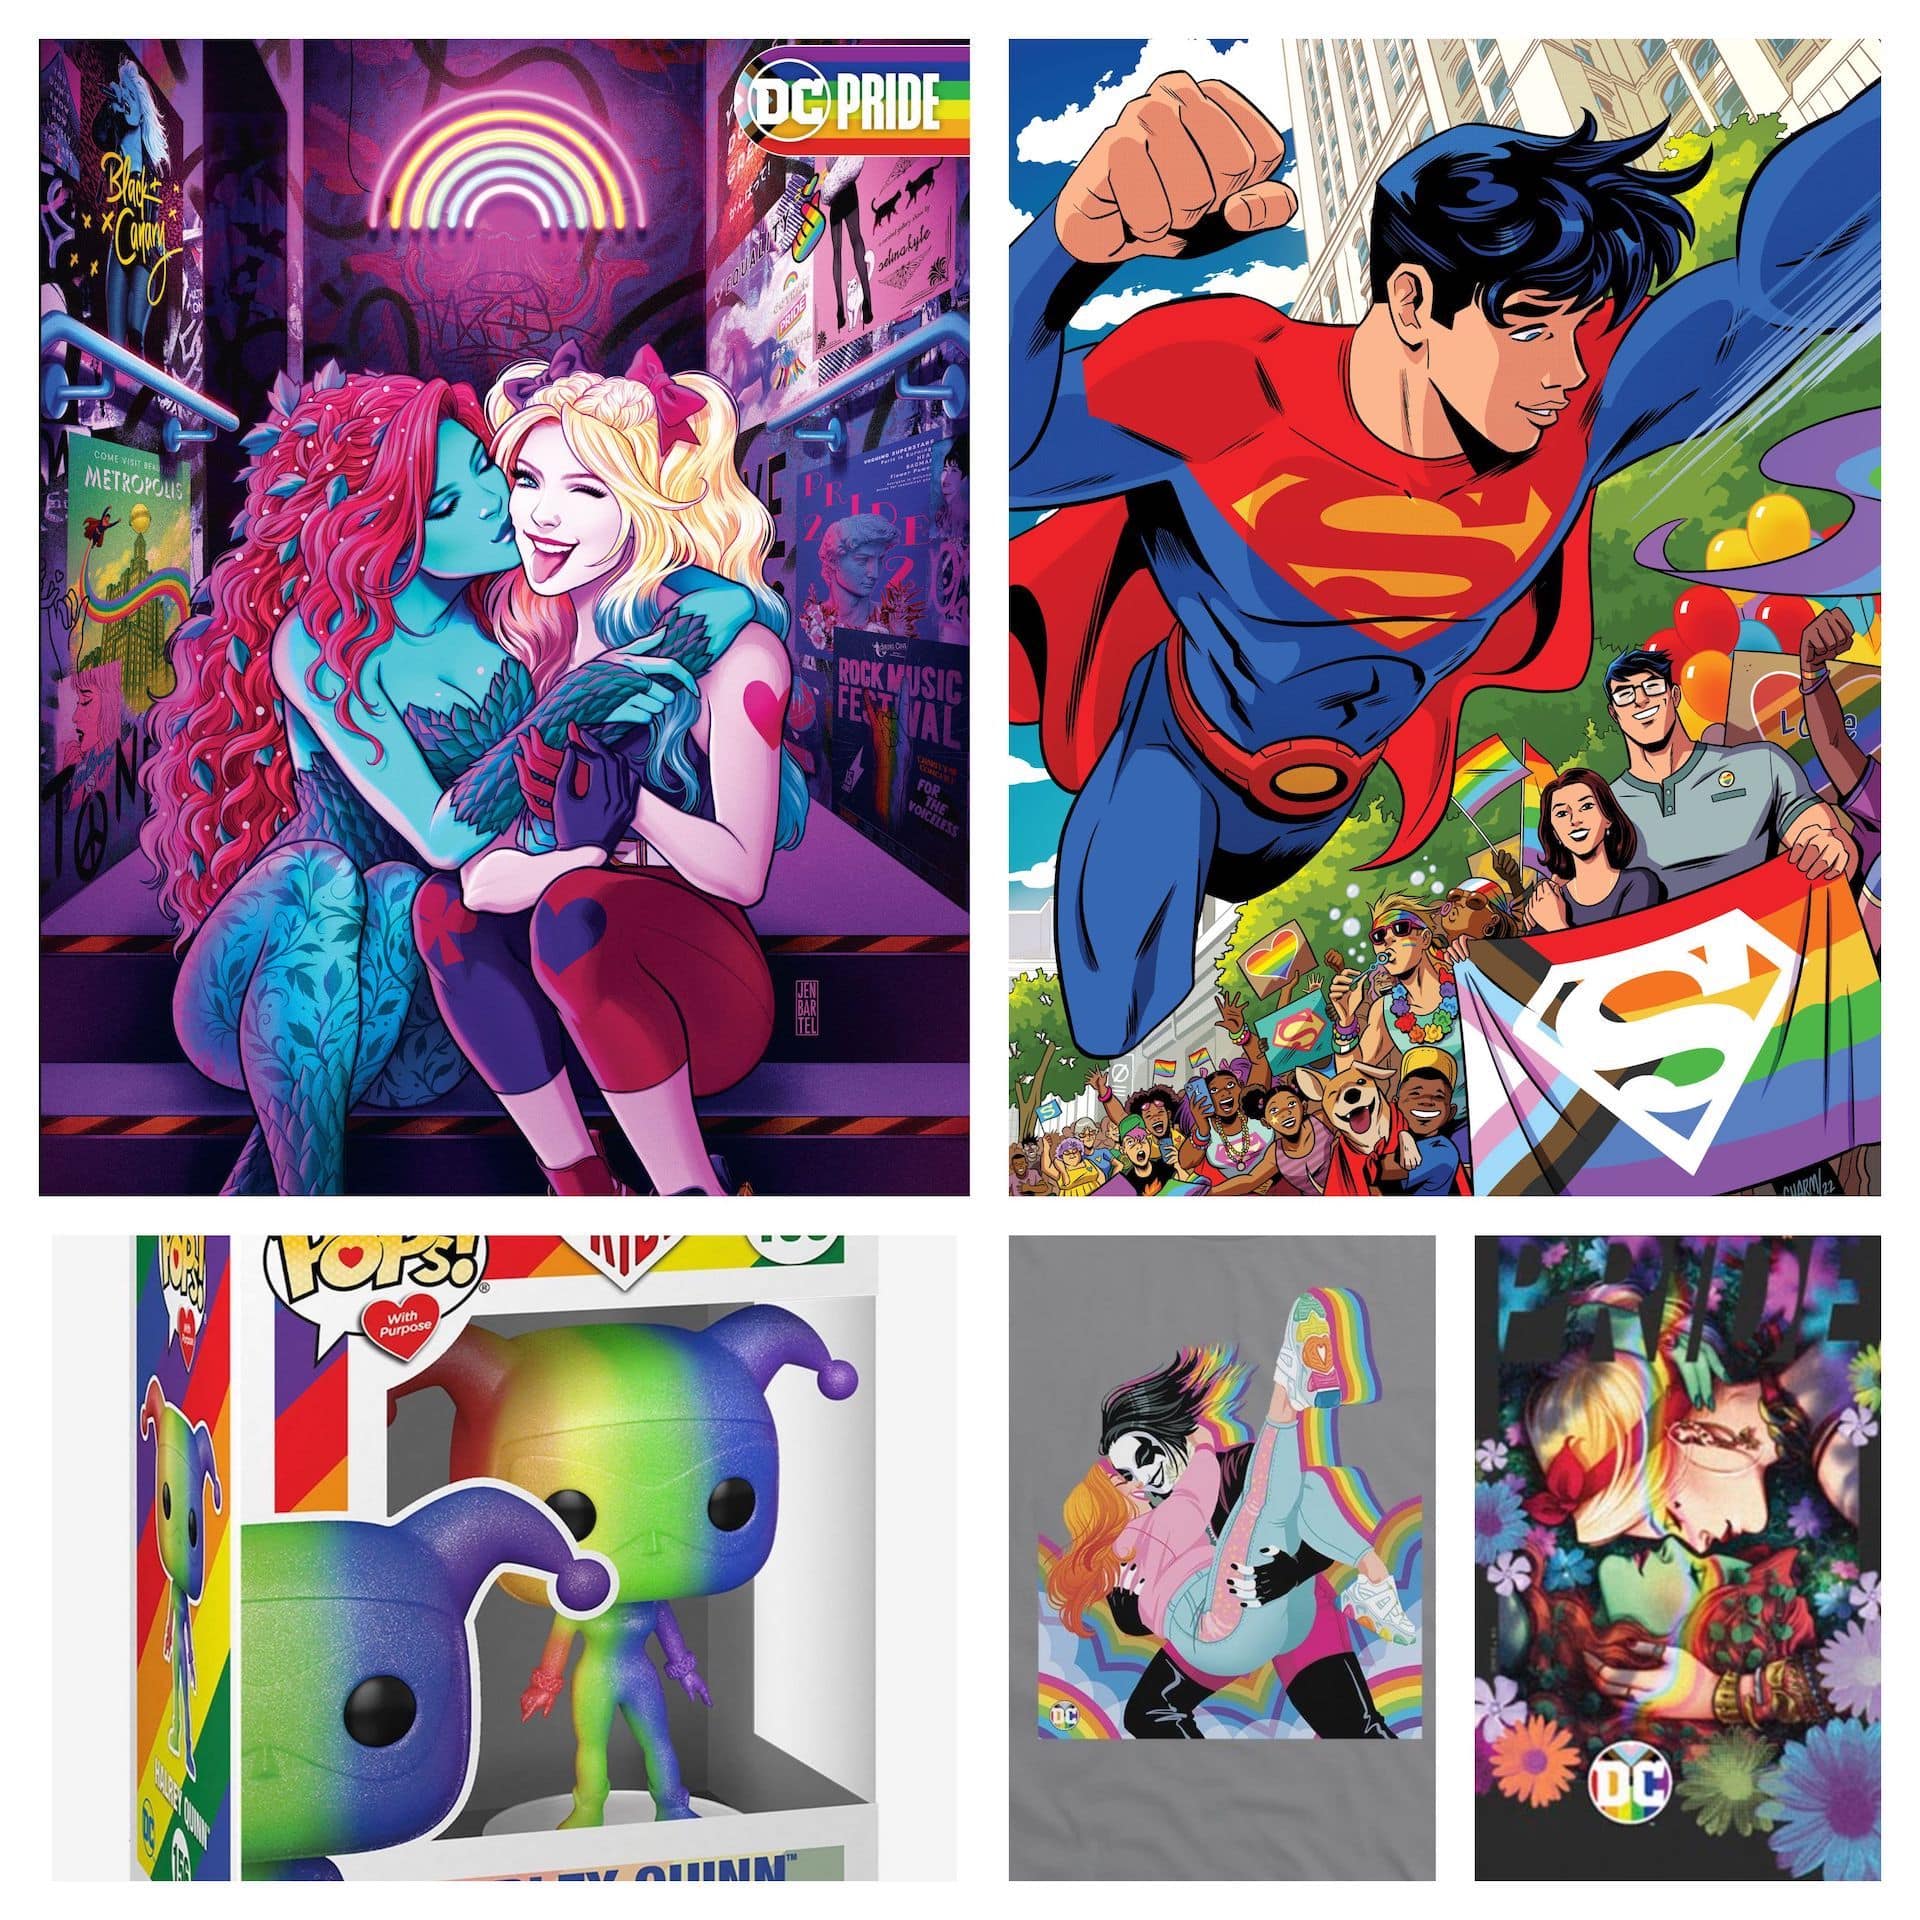 DC Comics outlines Pride month partners and launches DC Pride Hub